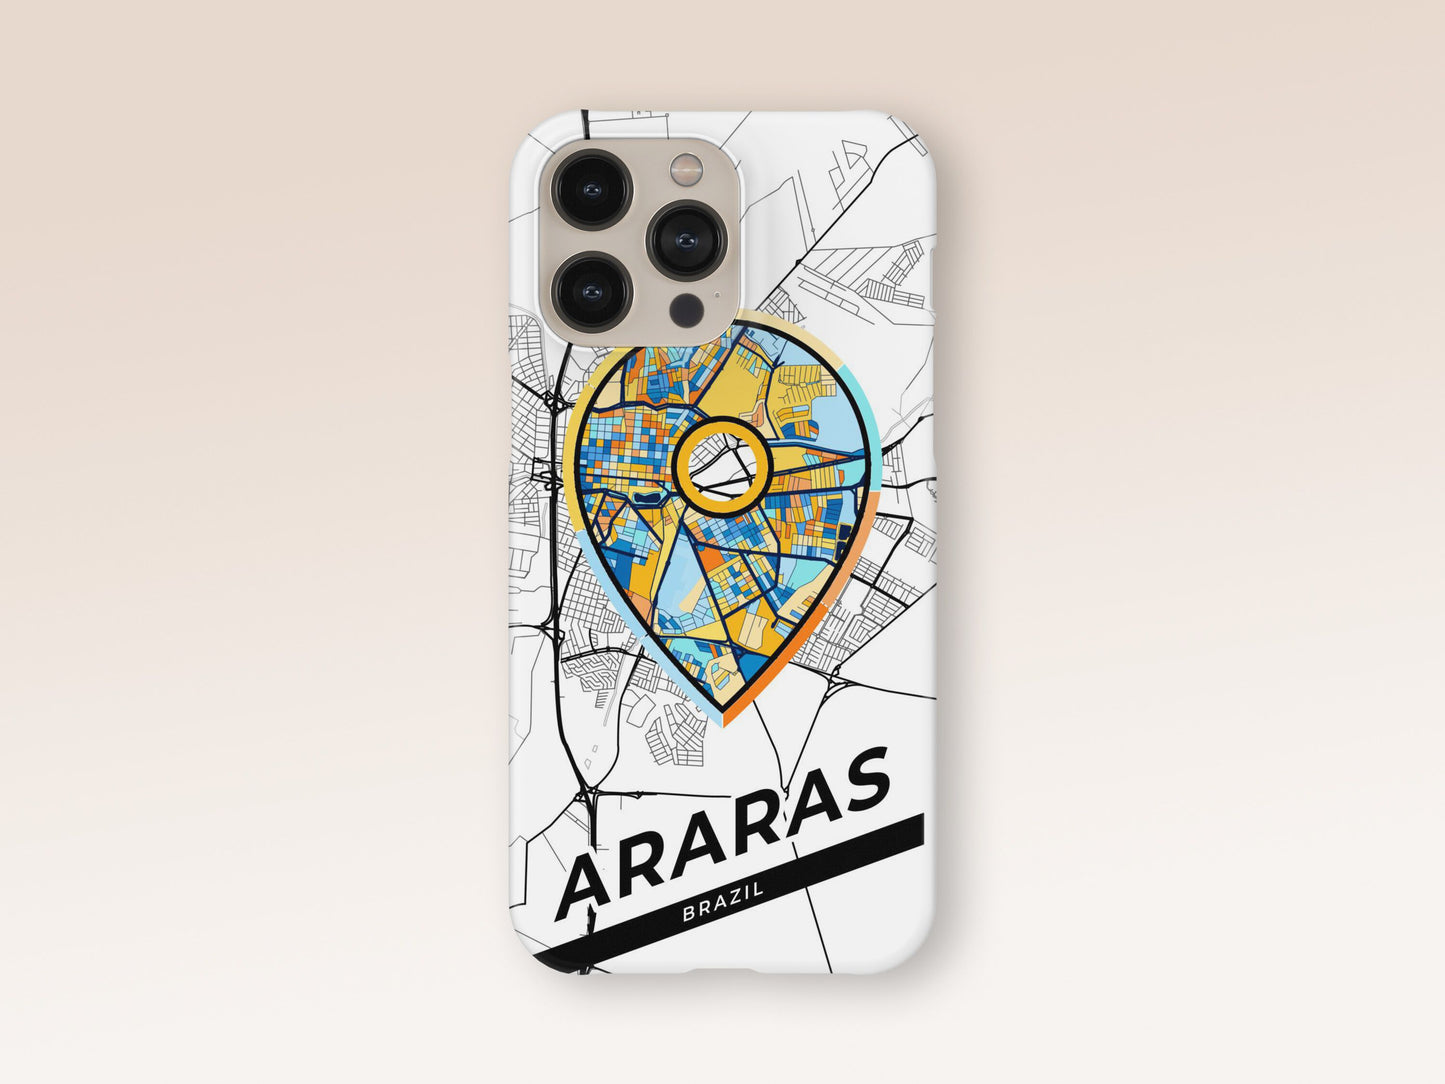 Araras Brazil slim phone case with colorful icon. Birthday, wedding or housewarming gift. Couple match cases. 1